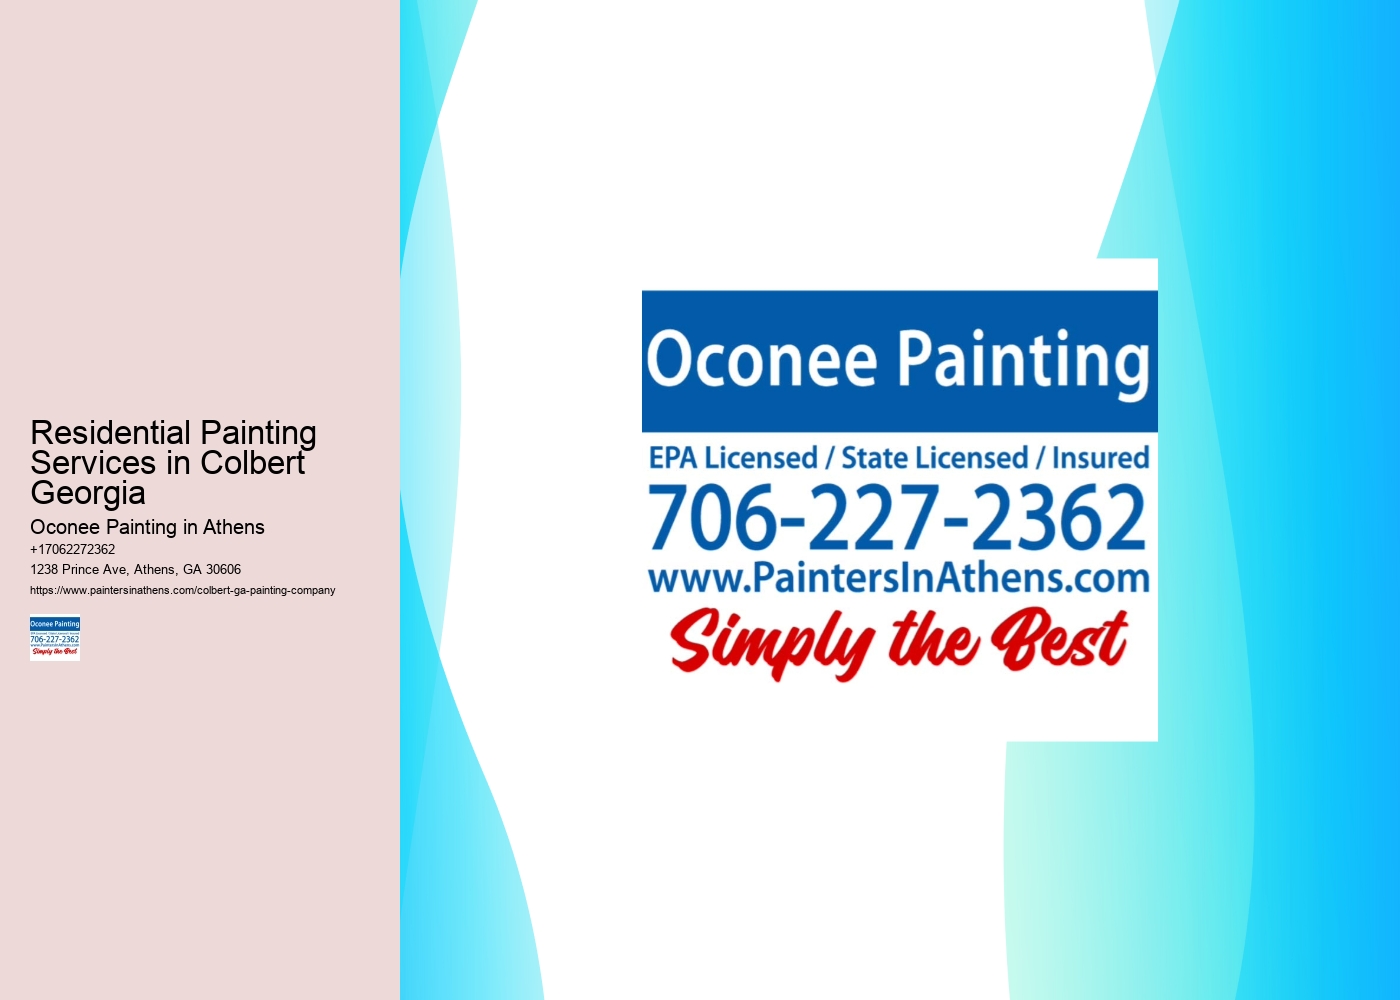 Residential Painting Services in Colbert Georgia